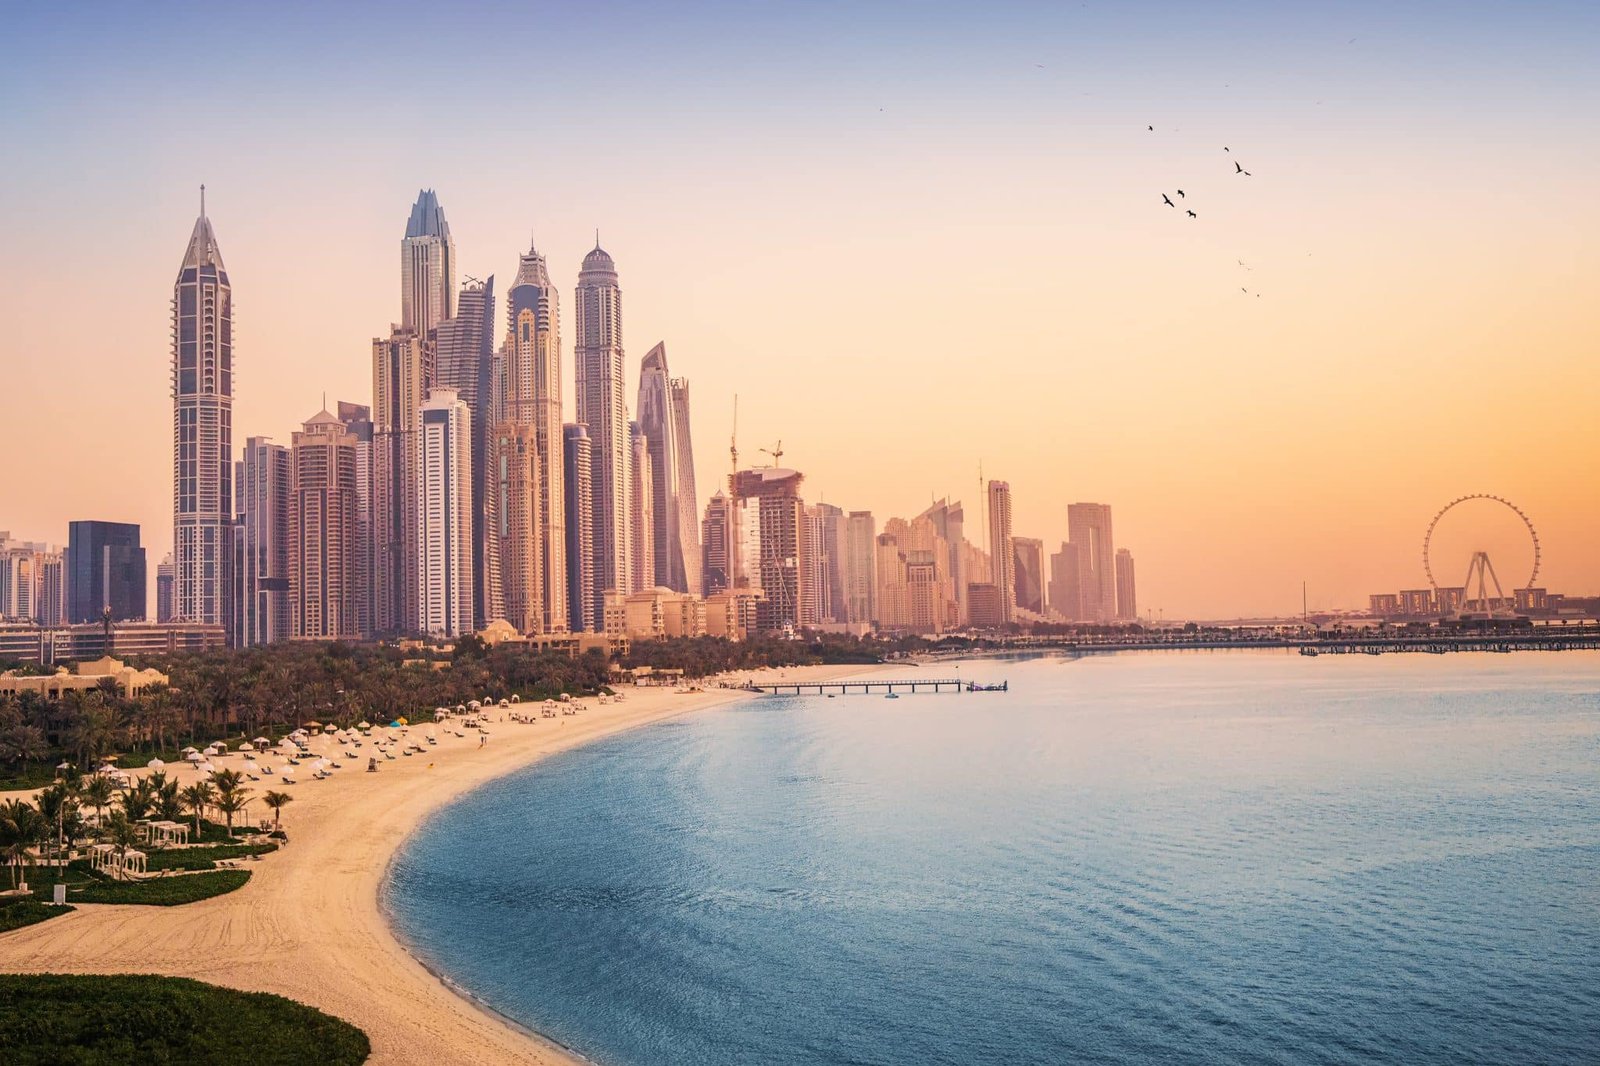 Sunset view of the Dubai Marina and JBR area and the famous Ferris Wheel and golden sand beaches in the Persian Gulf. Holidays and vacations in the UAE